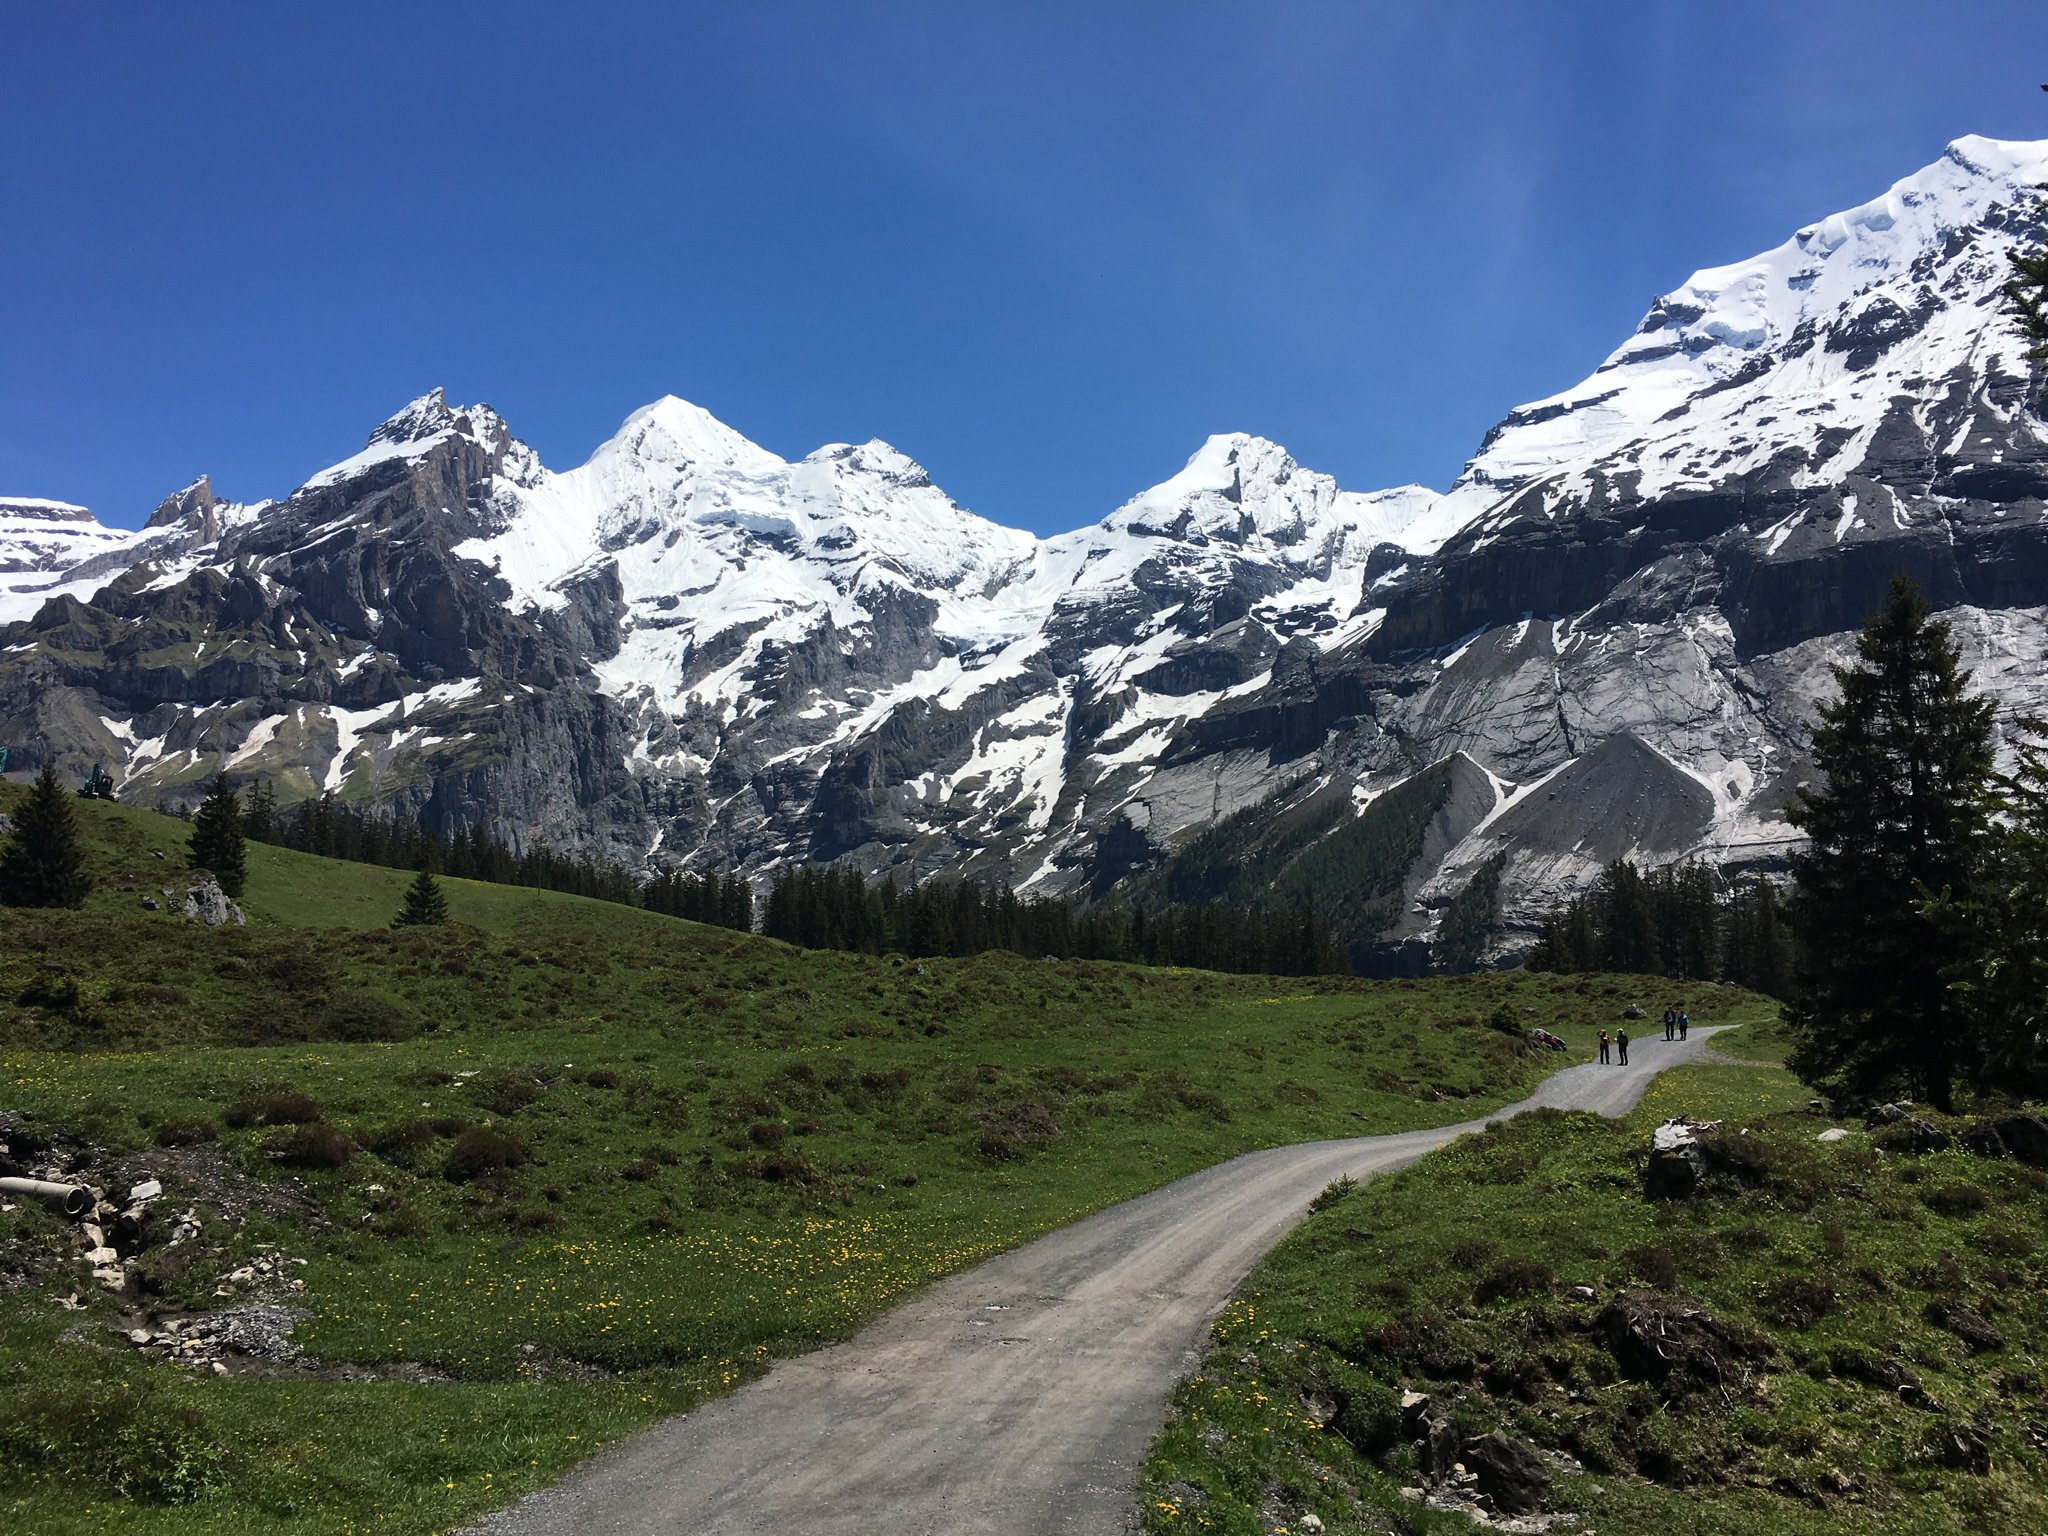 The trail to Oeschinensee